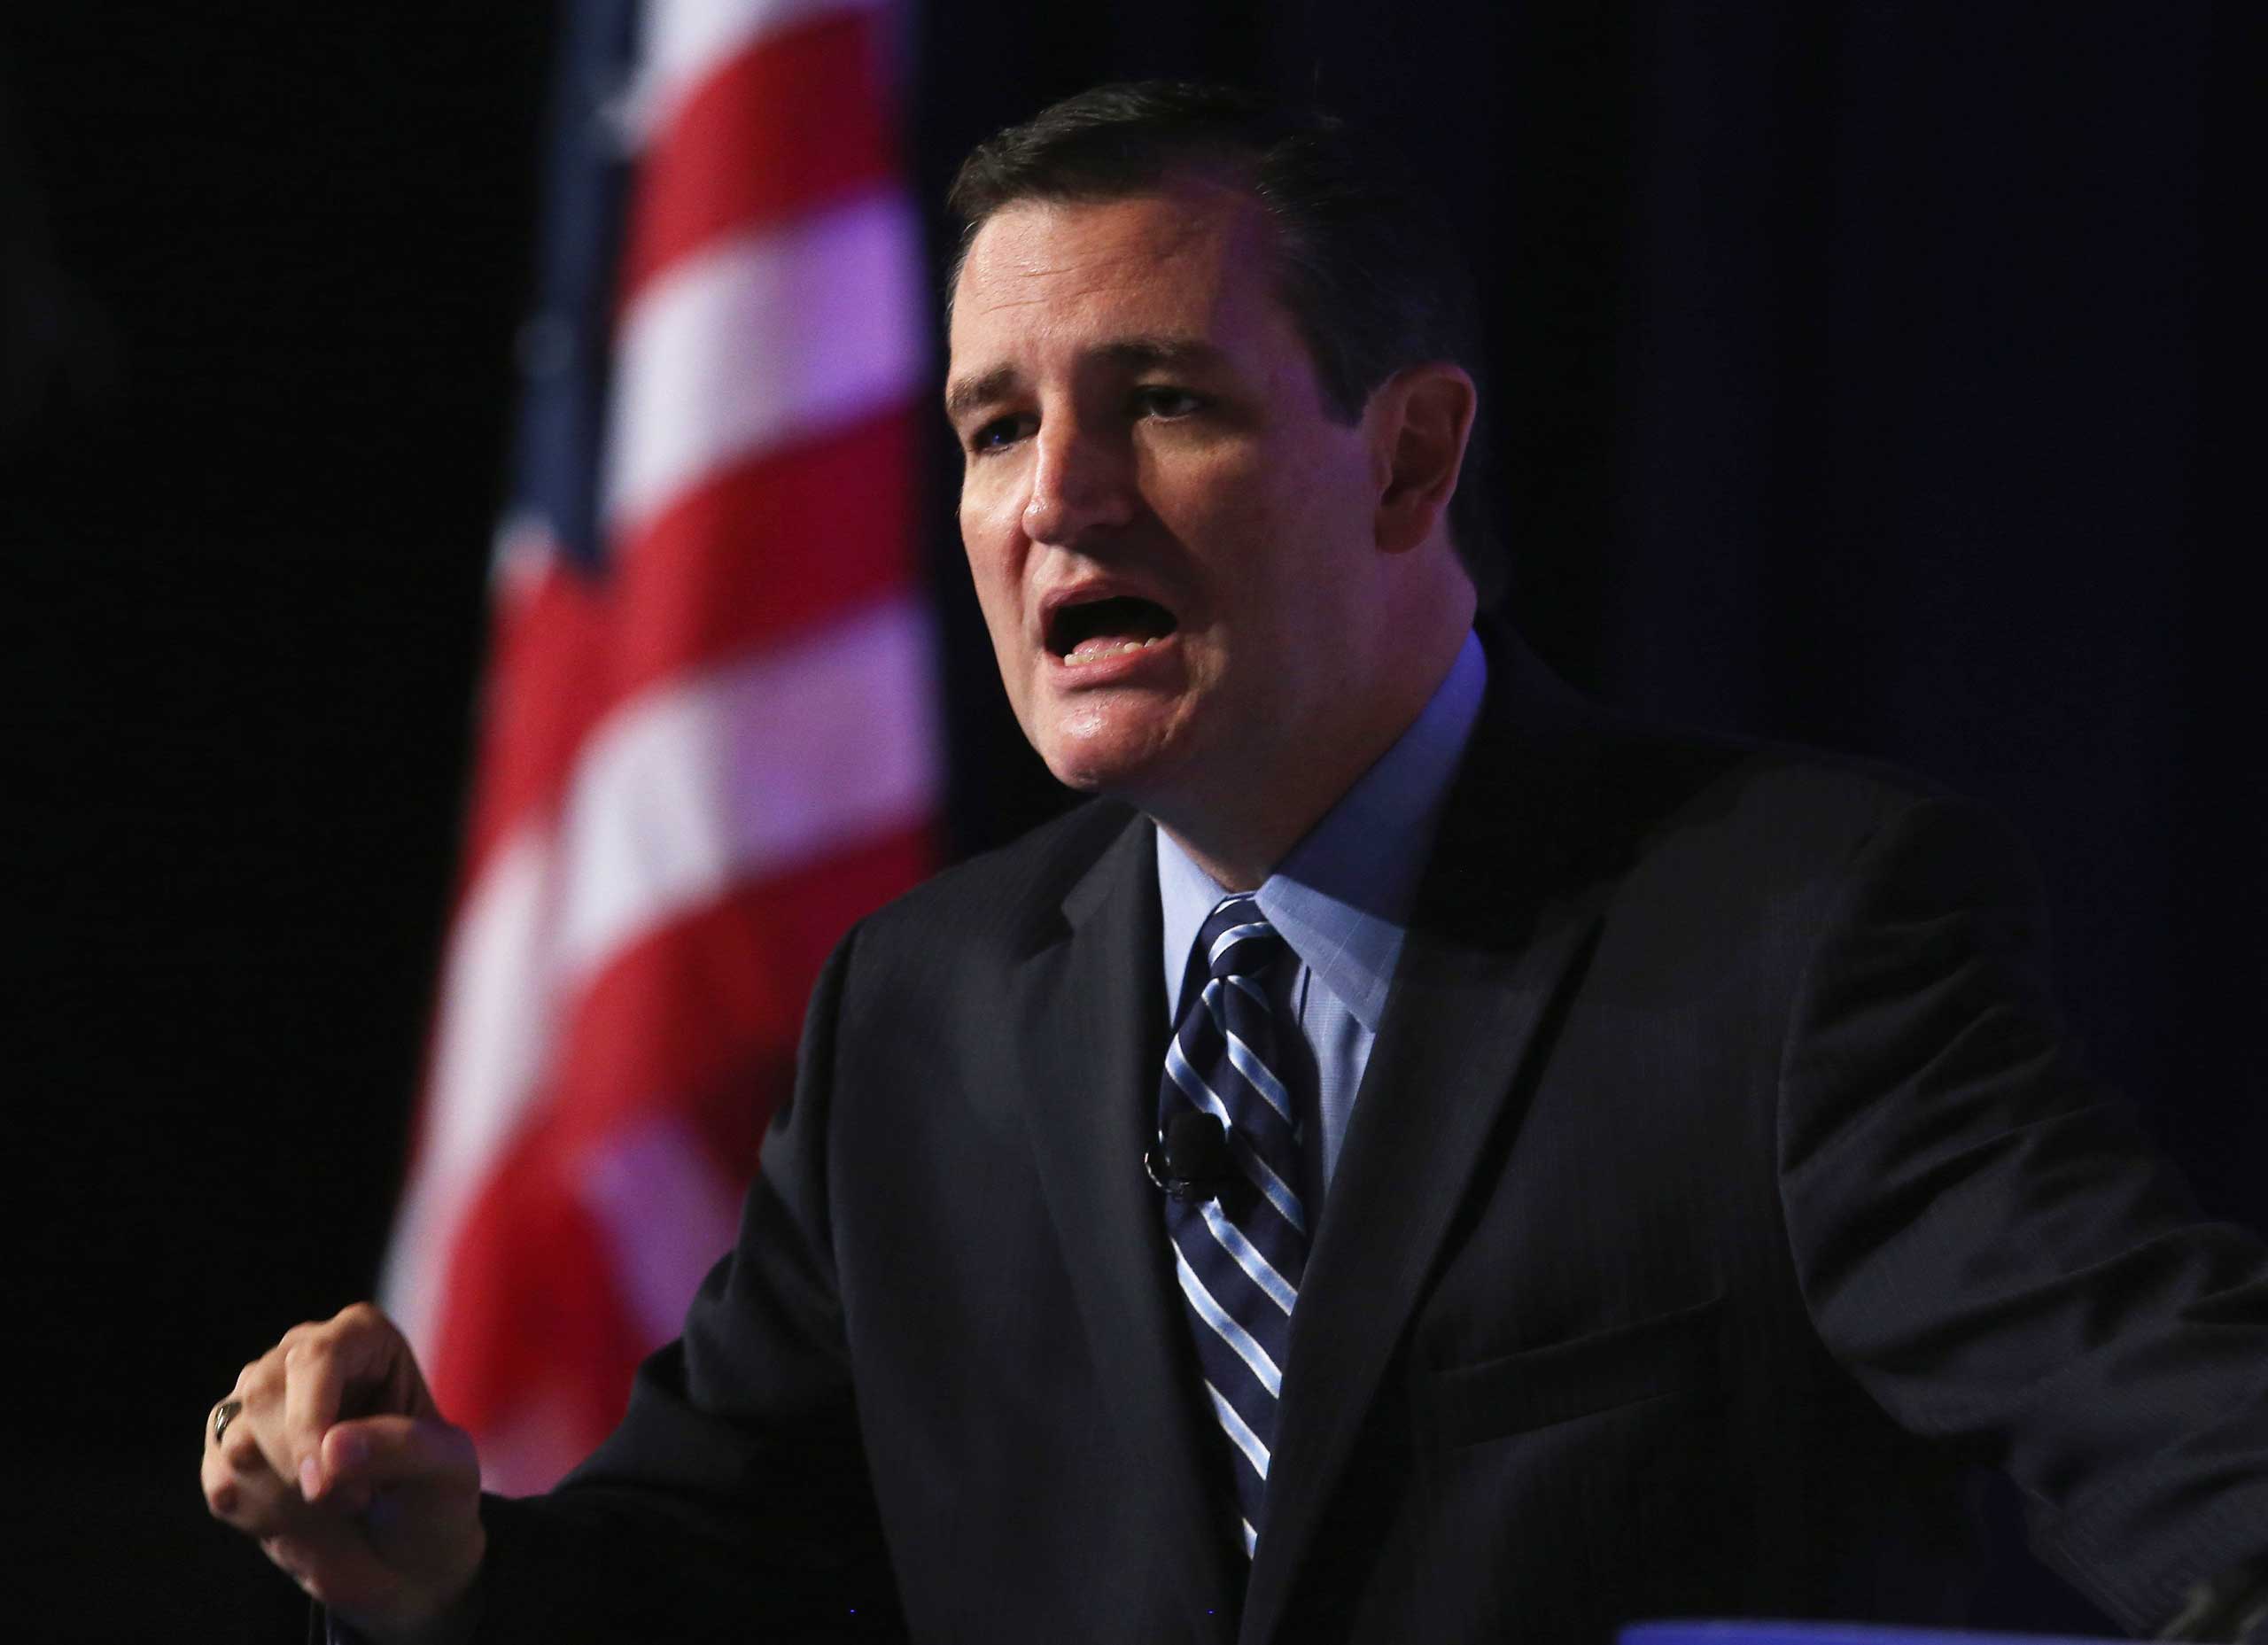 Sen. Ted Cruz (R-TX) speaks at the 2014 Values Voter Summit, Sept. 26, 2014 in Washington, DC. (Mark Wilson—Getty Images)